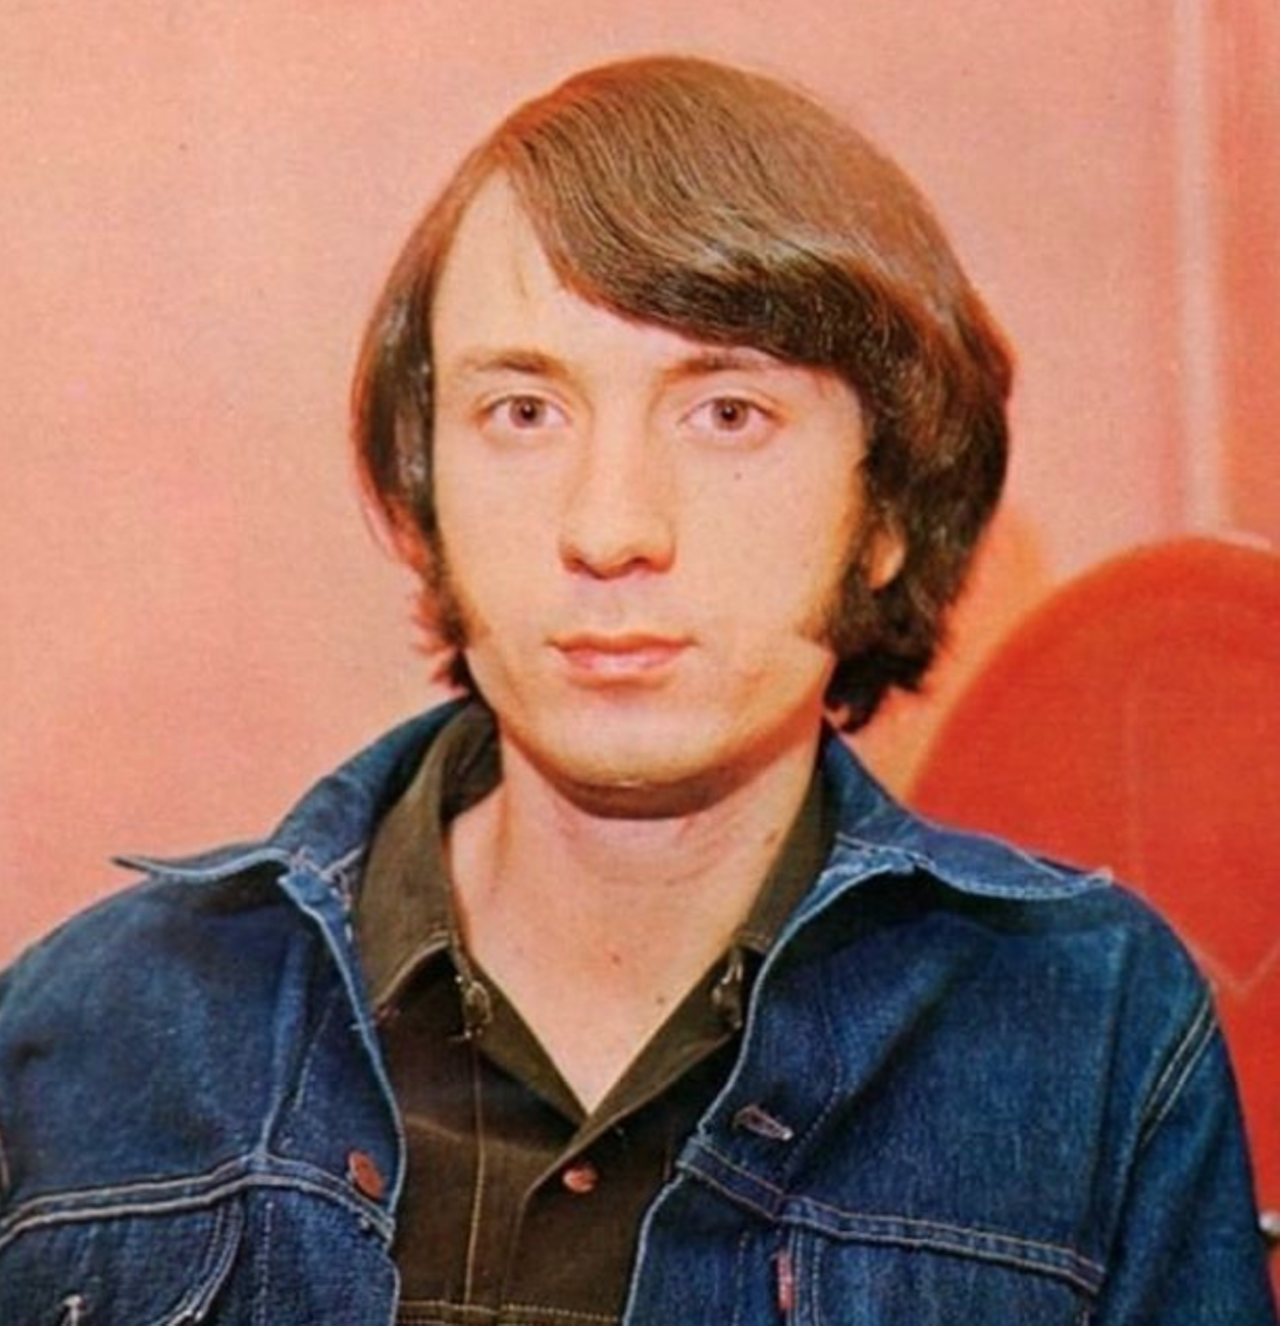 Michael Nesmith
After being born in Houston and growing up in Dallas, Michael Nesmith eventually landed in San Antonio. Before gaining fame in the ‘60s as the lead singer of The Monkees, Smith attended San Antonio College. While in school, he and John London won the college’s first-ever talent award. He was also briefly in the U.S. Air Force and completed his basic training at Lackland AFB.
Photo via Instagram / dolenzjonestorknesmith